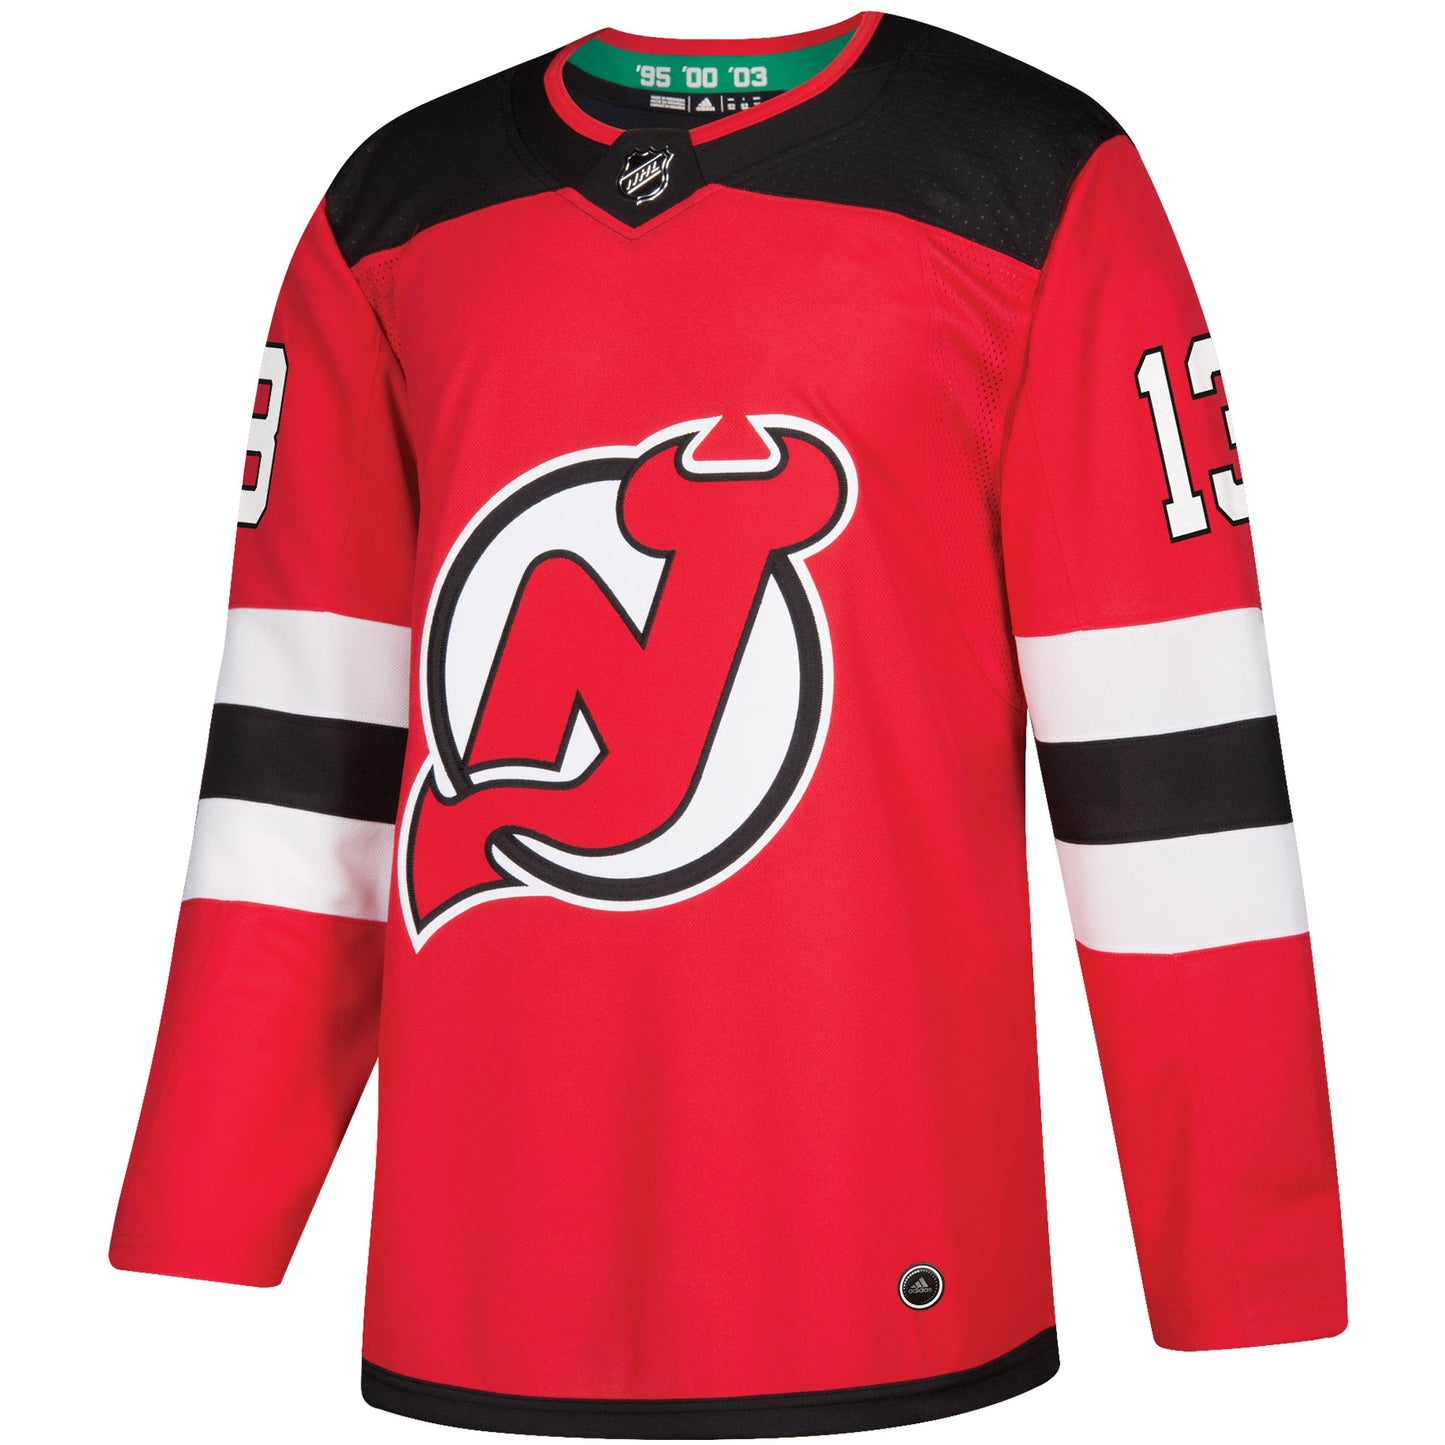 Nico Hischier New Jersey Devils adidas Authentic Player Jersey - Red